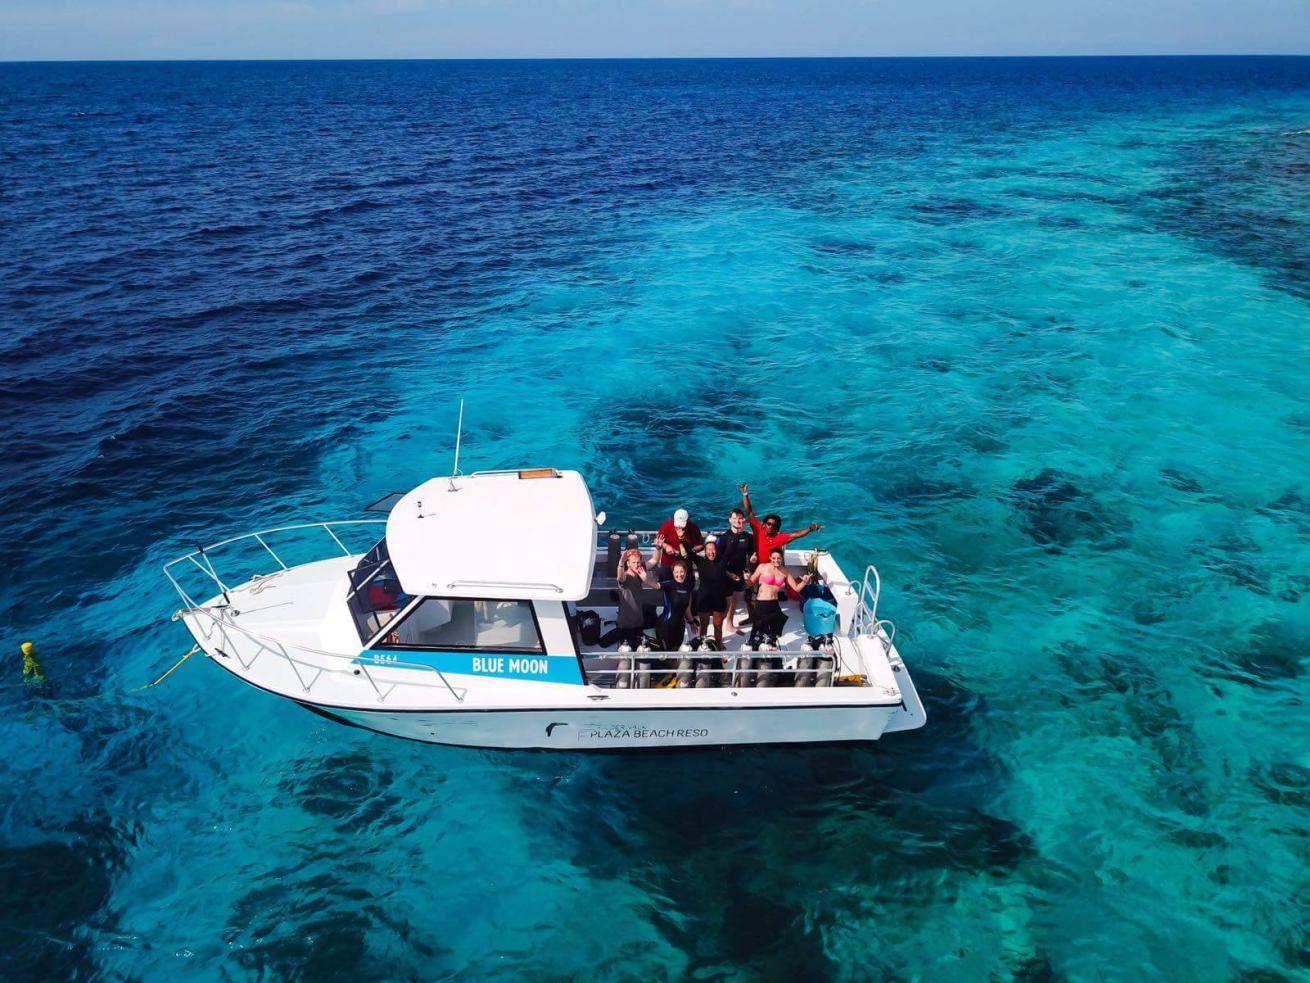 Boat at sea with scuba divers.